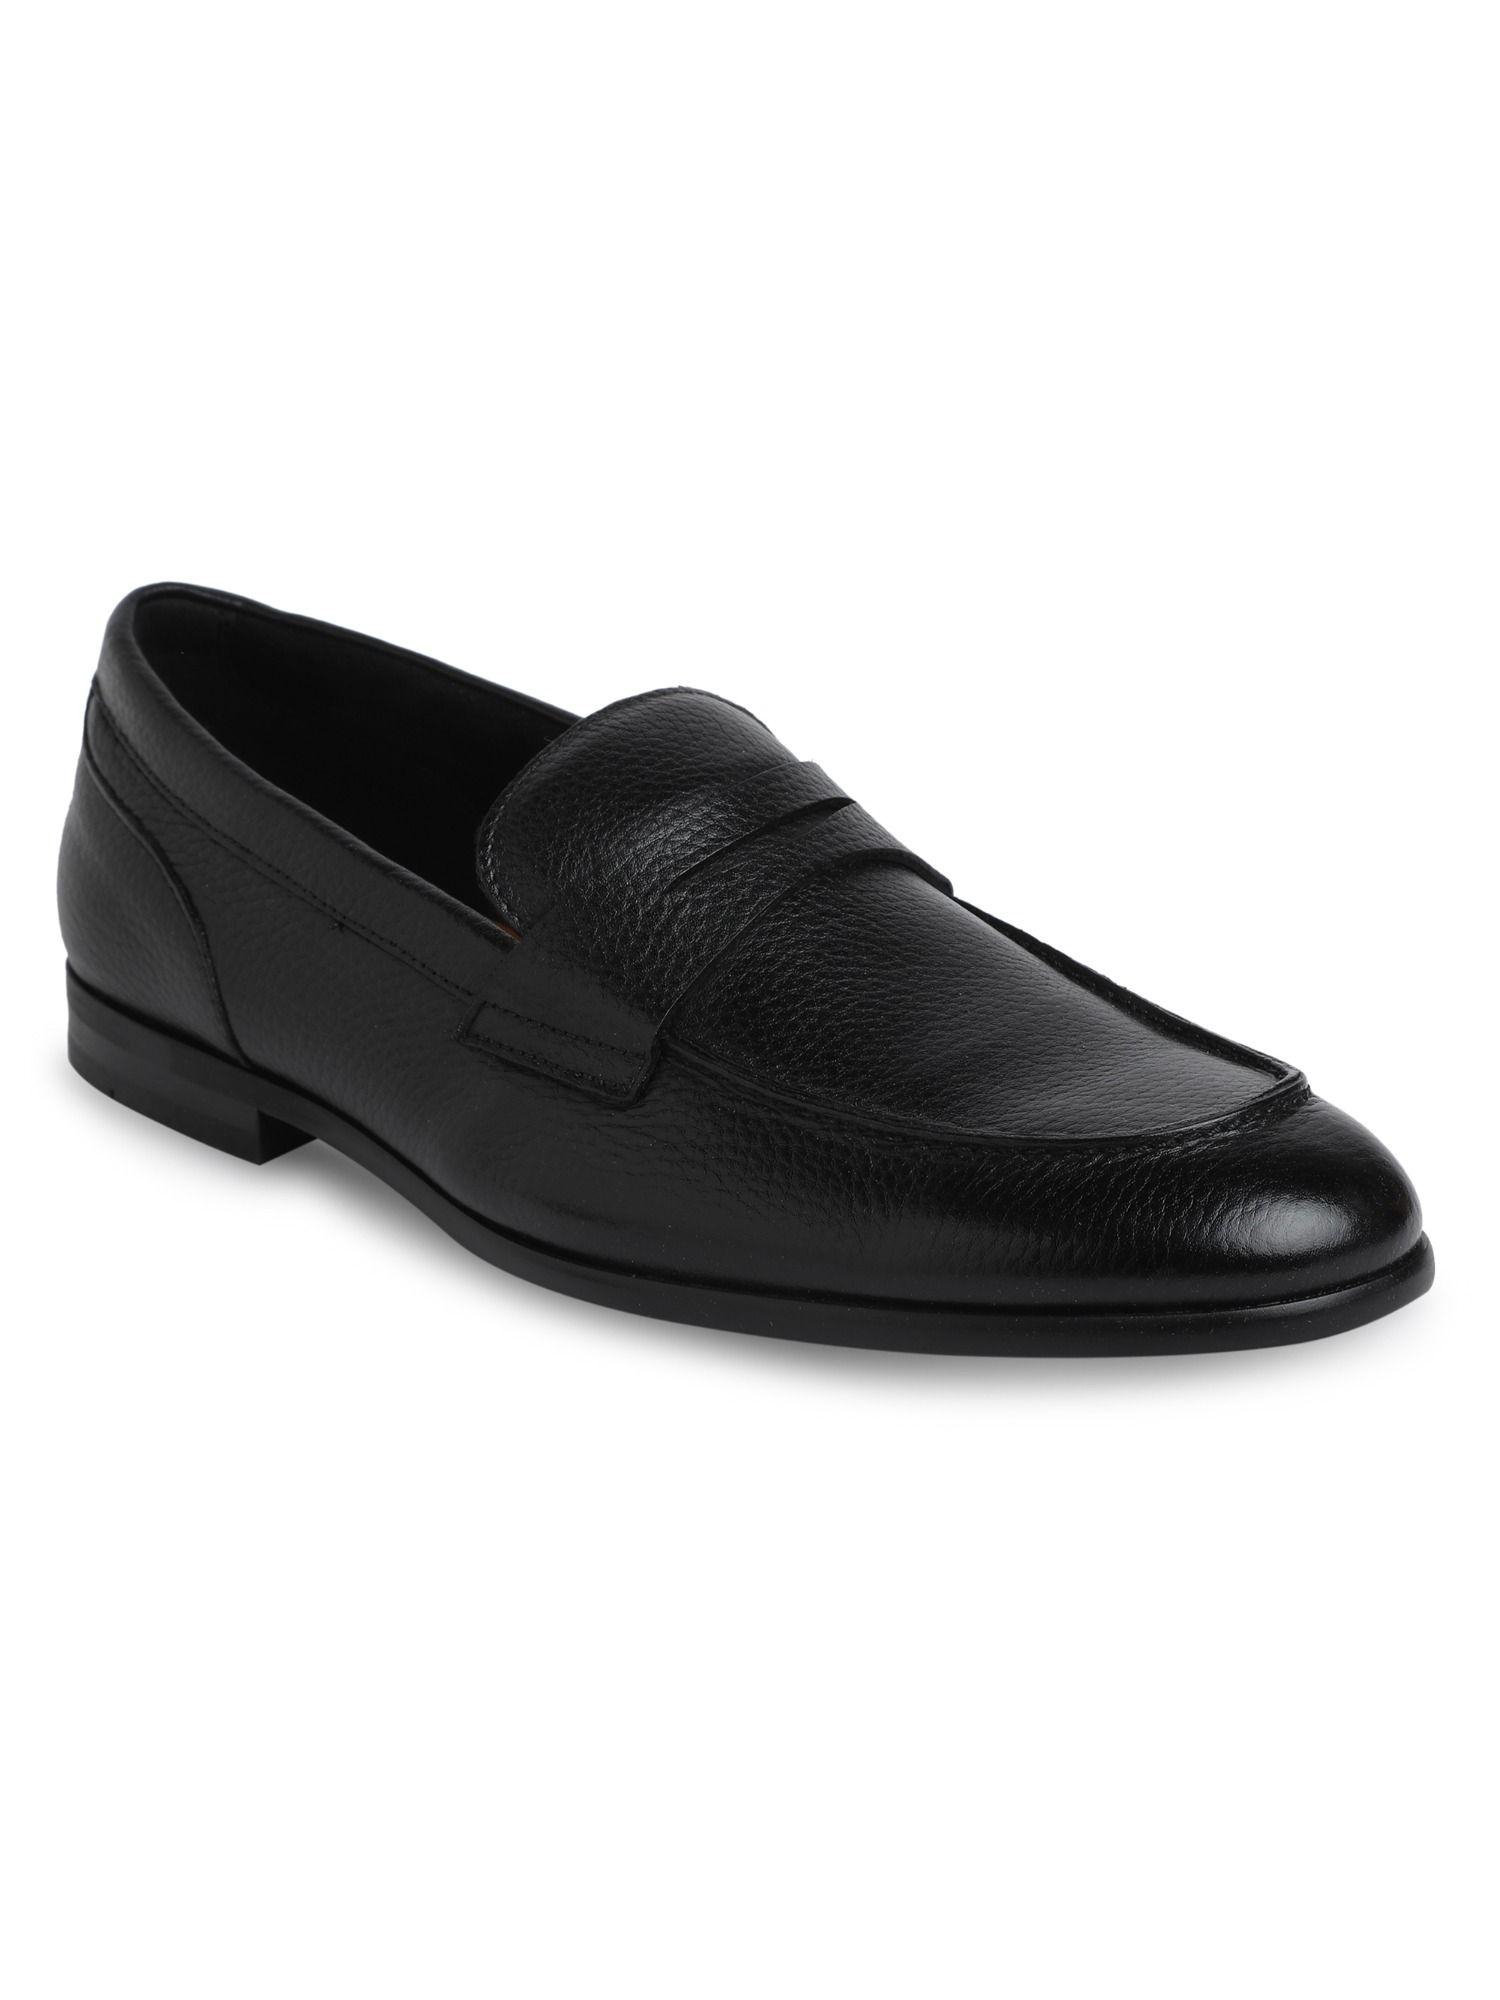 bainville leather black solid formal shoes